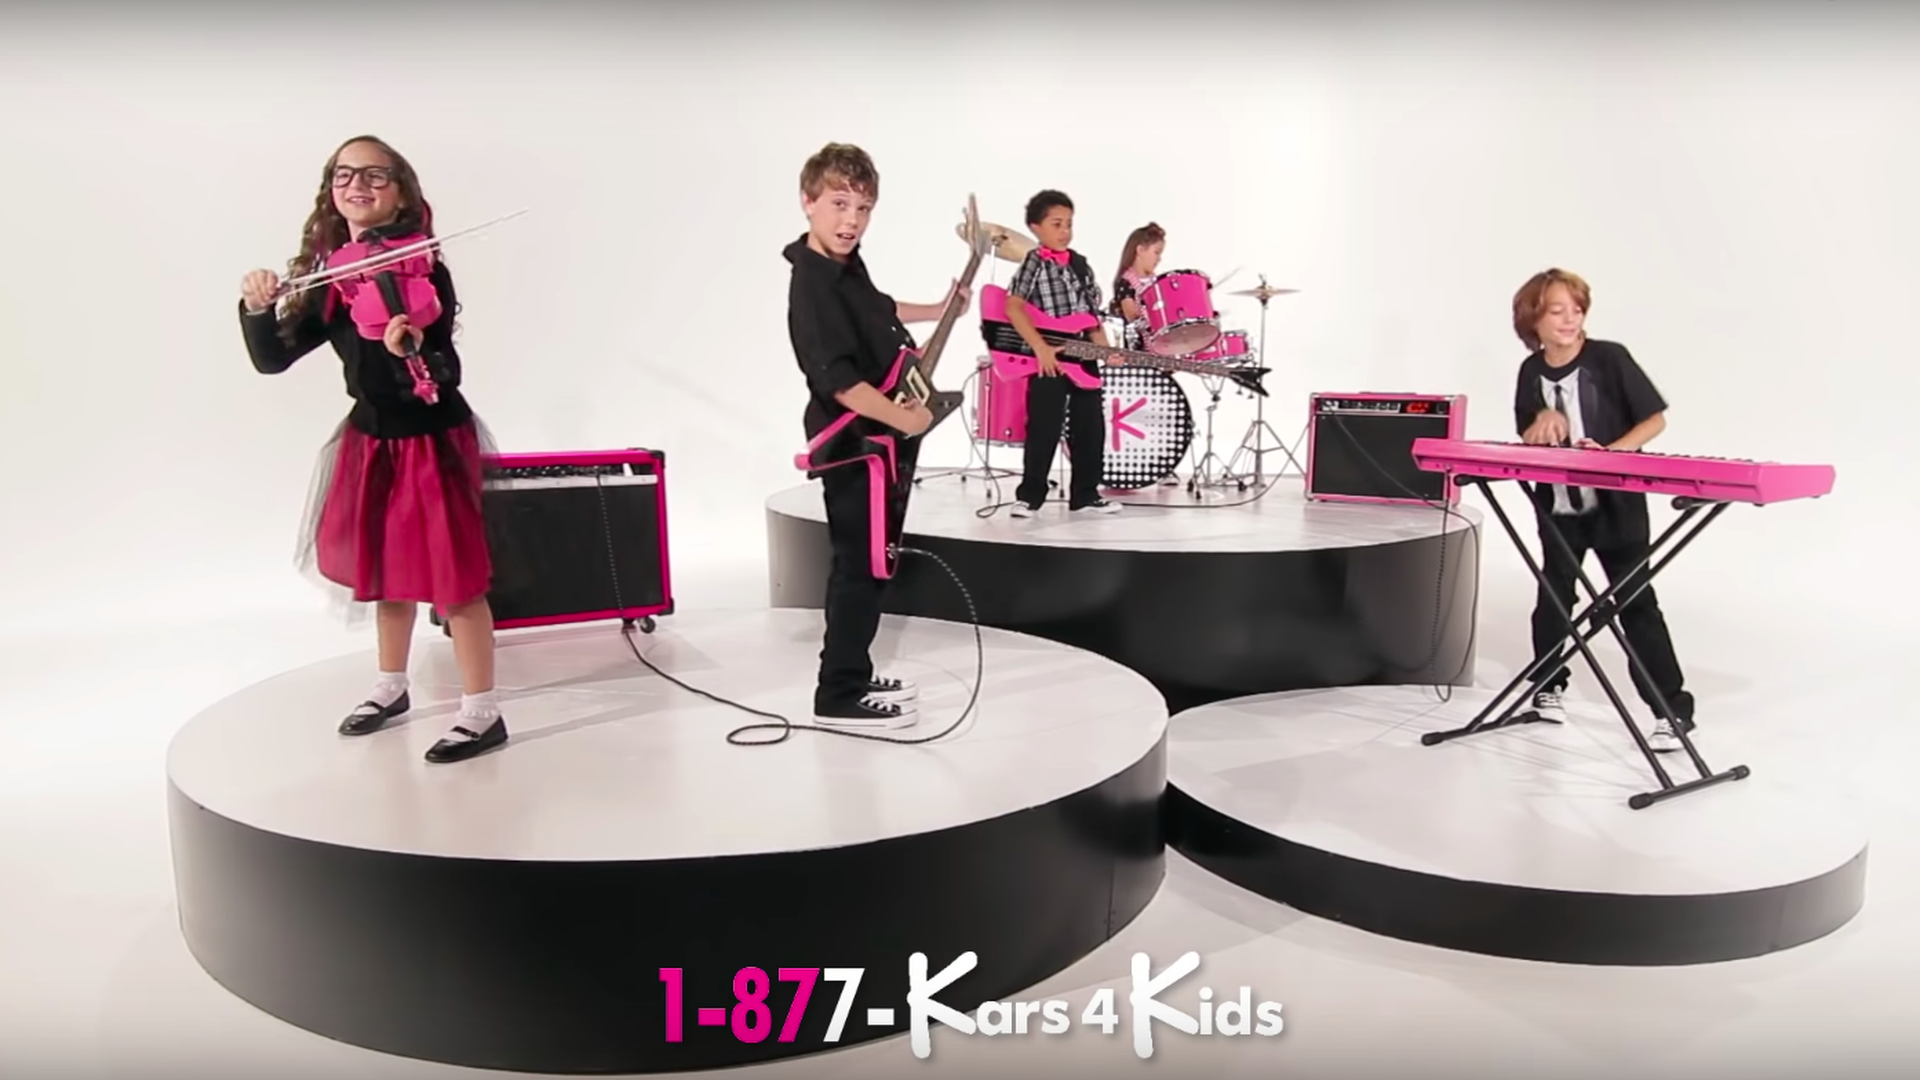 A screengrab of the well-known Kars 4 Kids commercial.